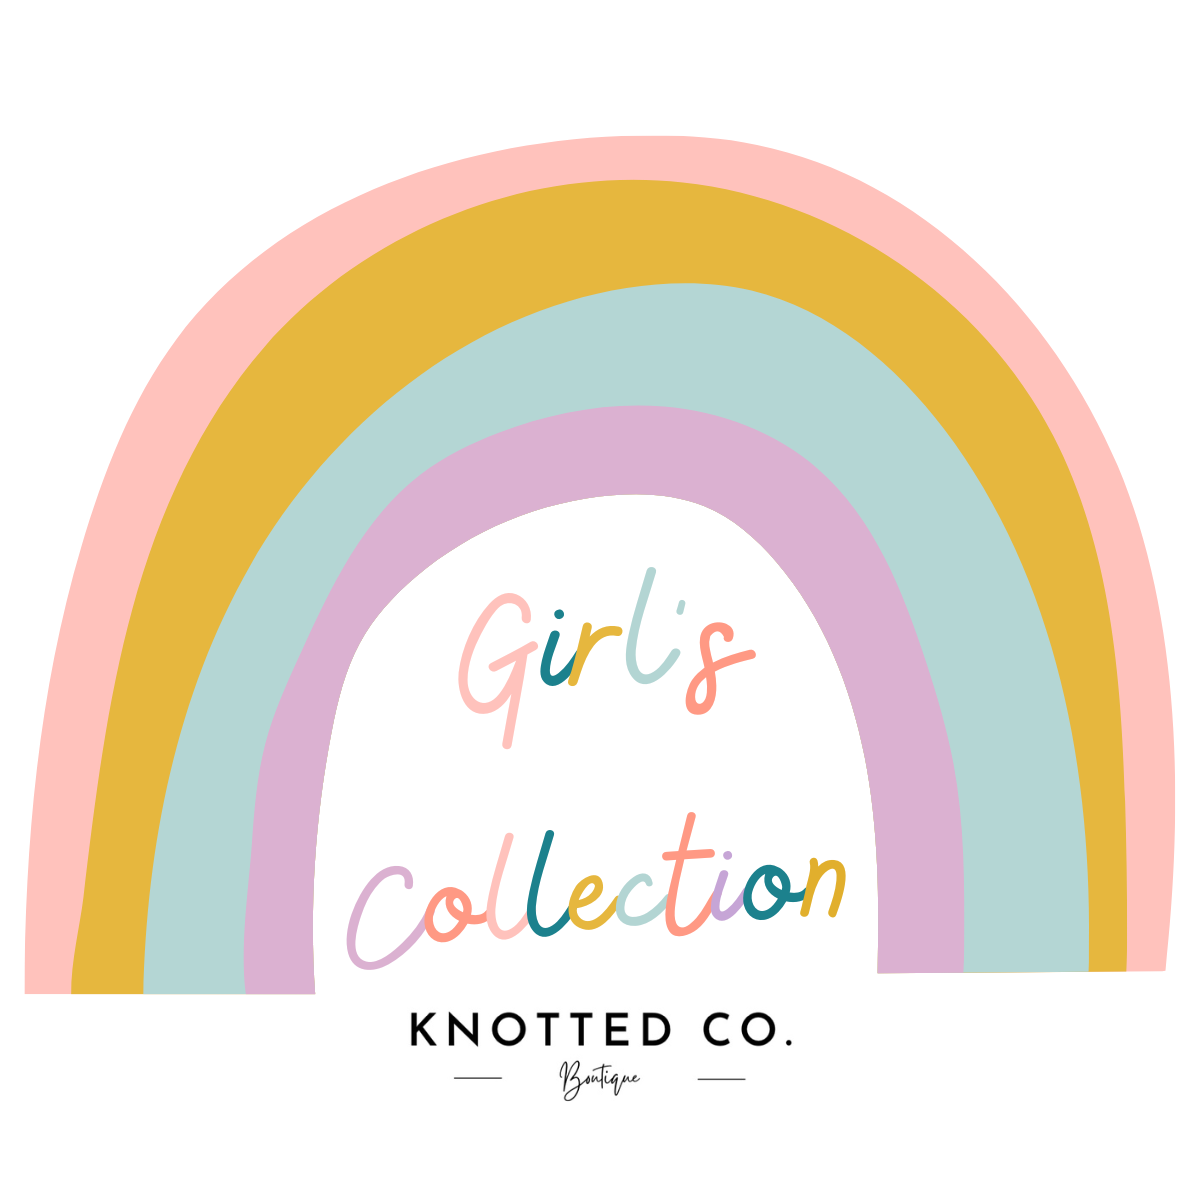 Girl's Collection